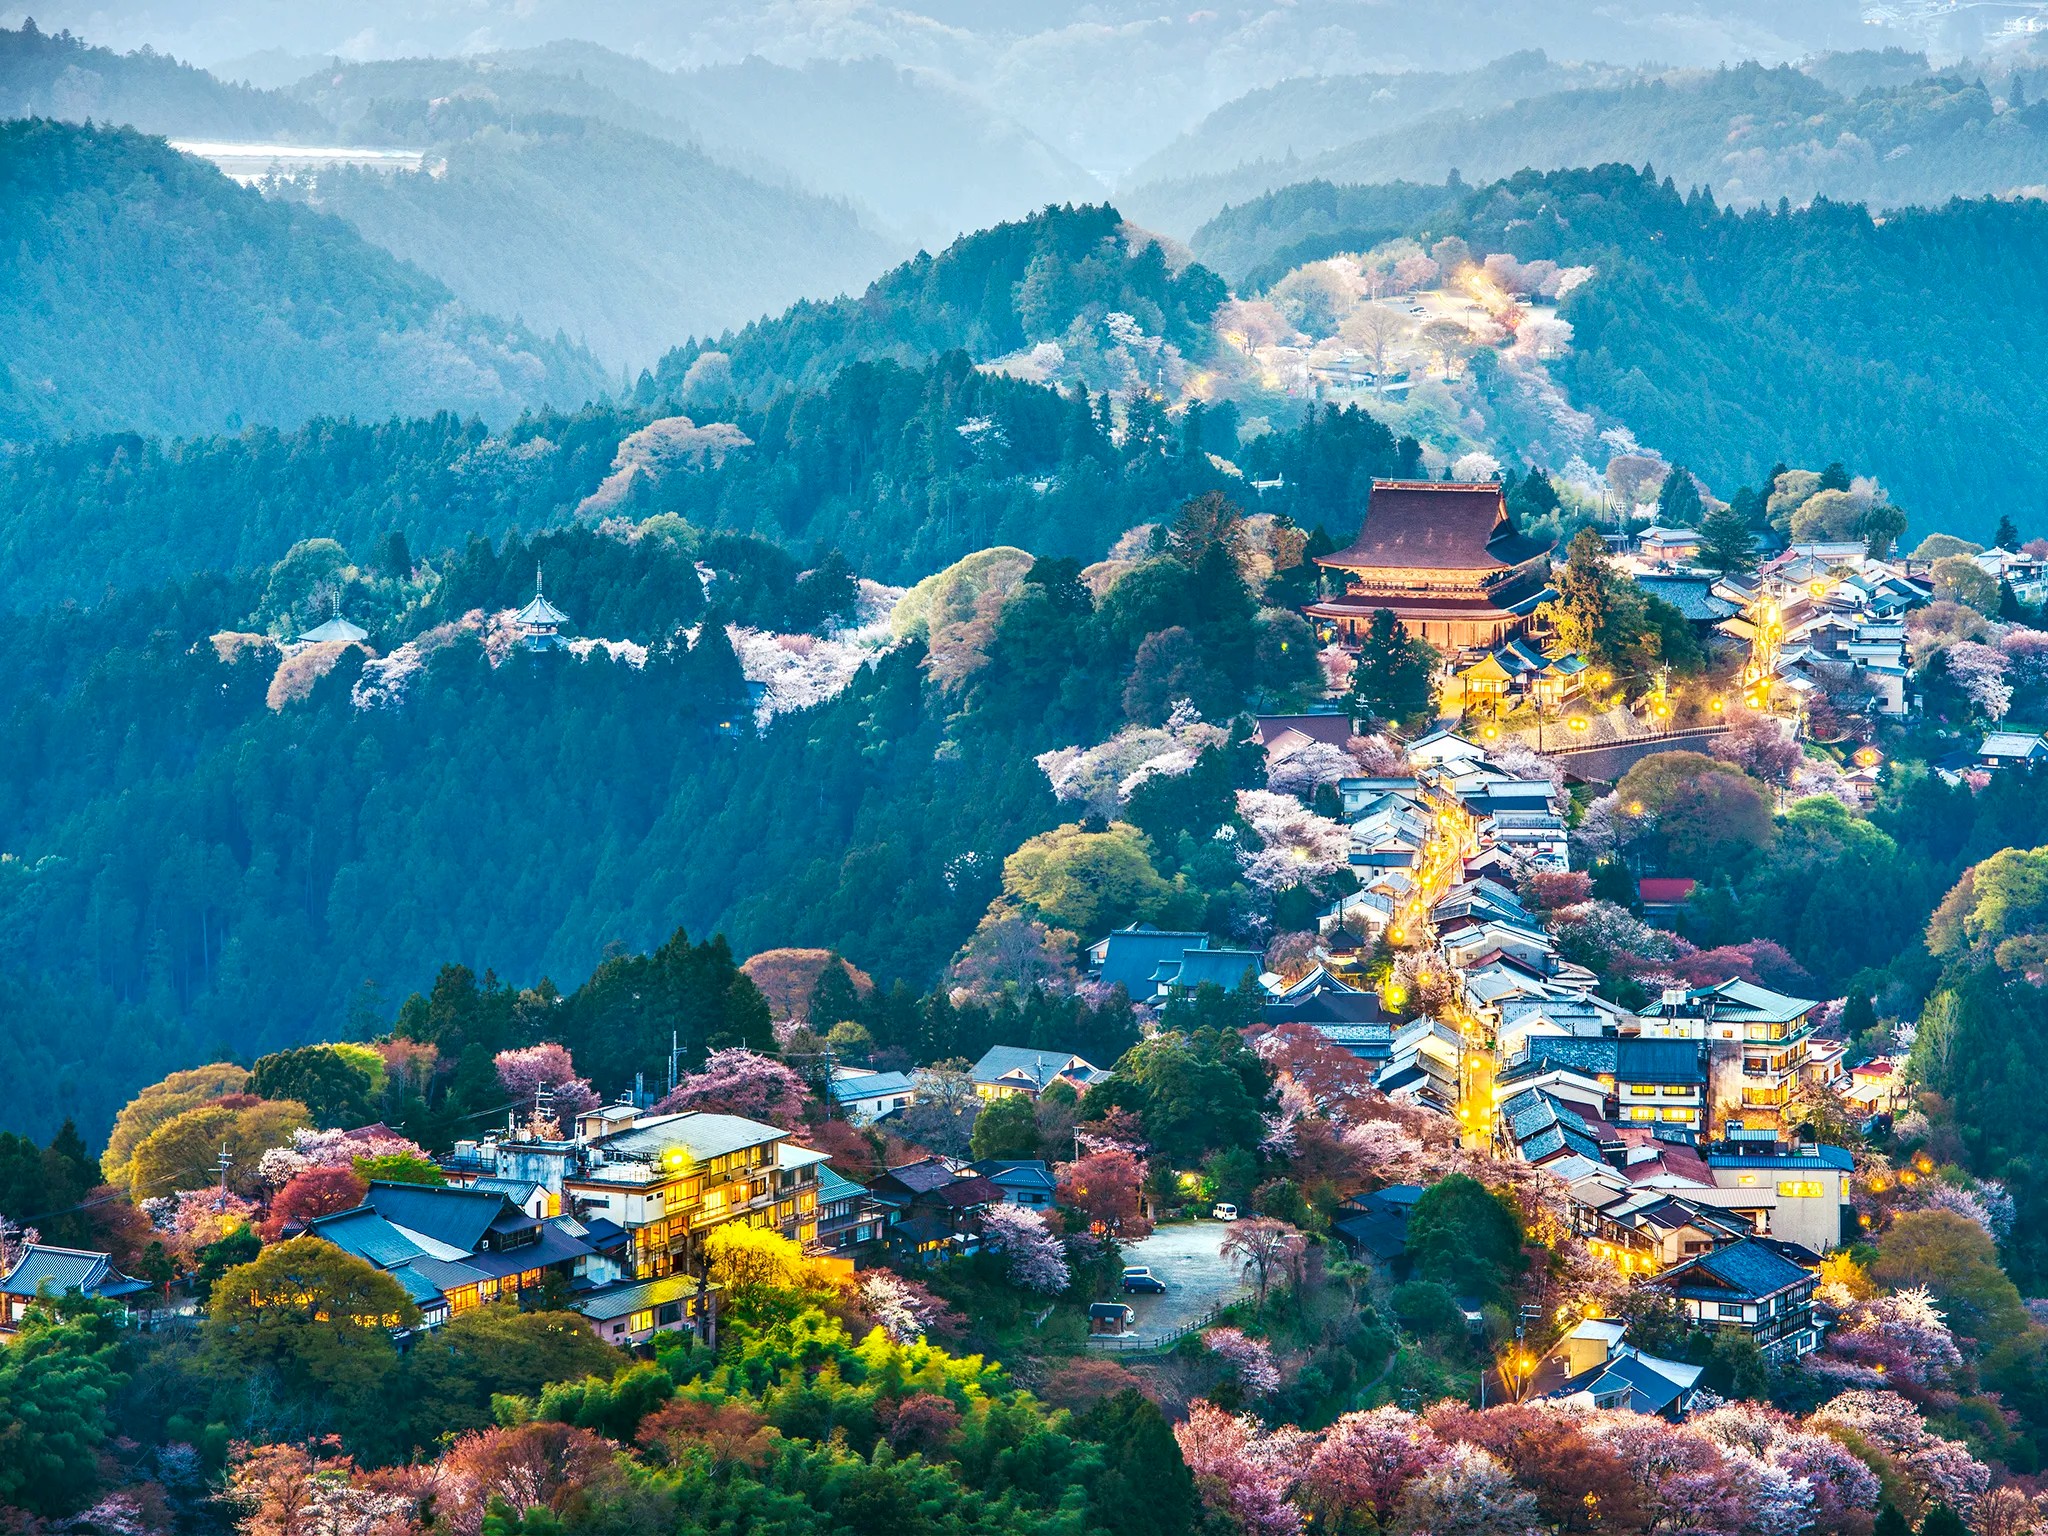 The time is right to visit Japan and see the country’s stunning scenery